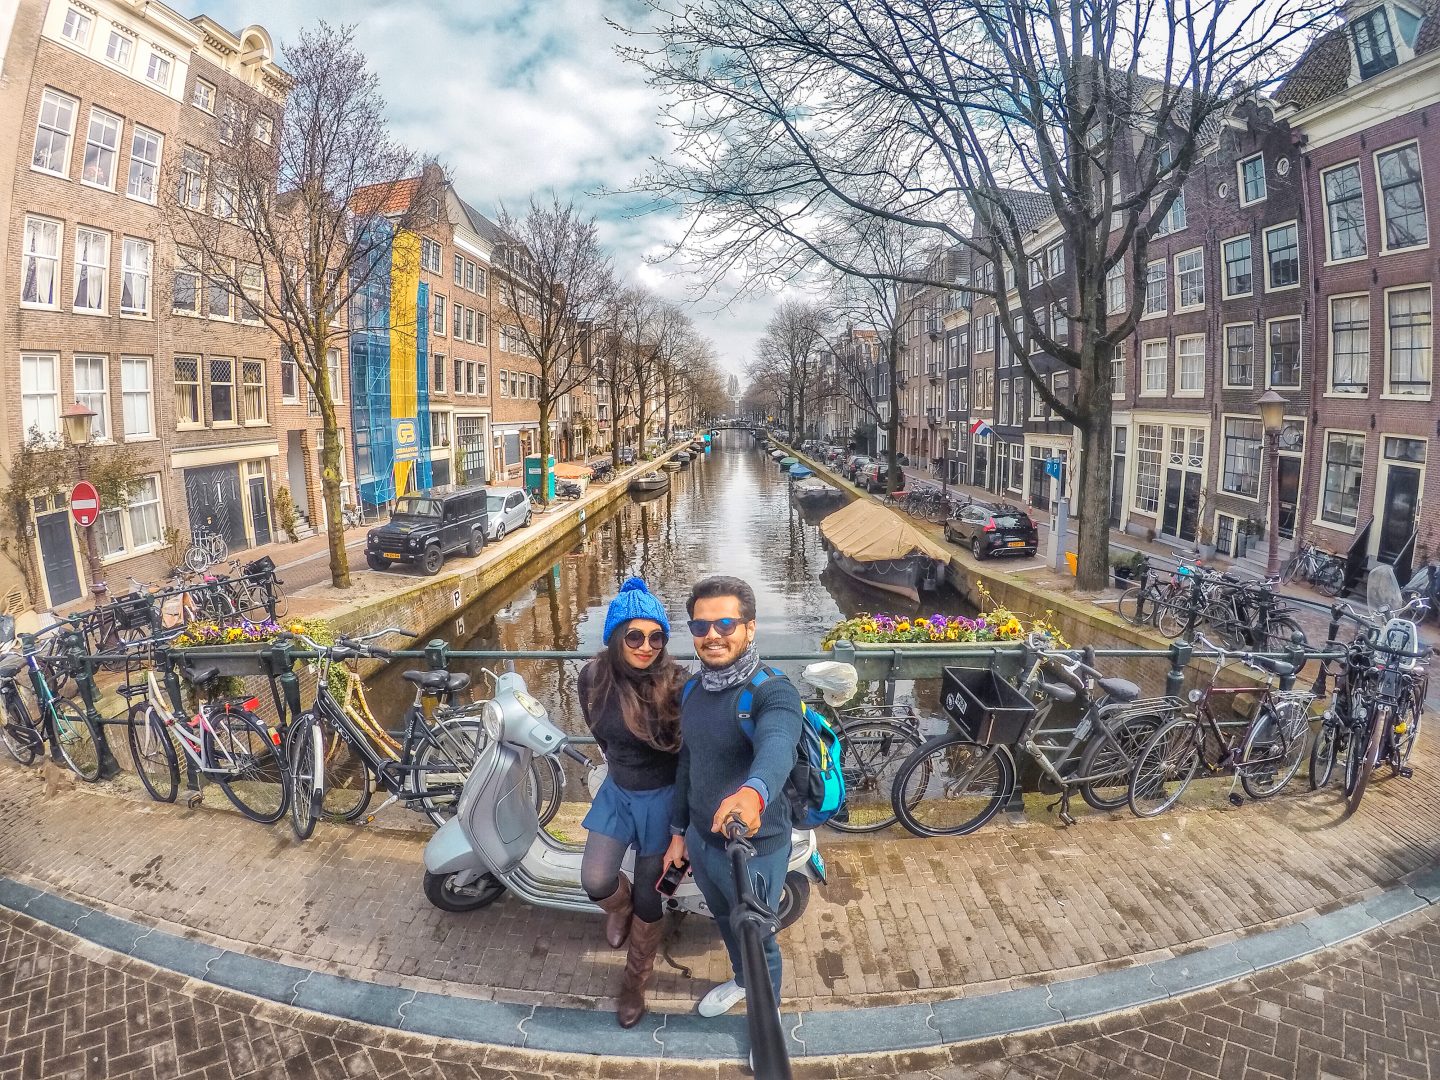 Things To Do In Amsterdam On A Budget-The Canals